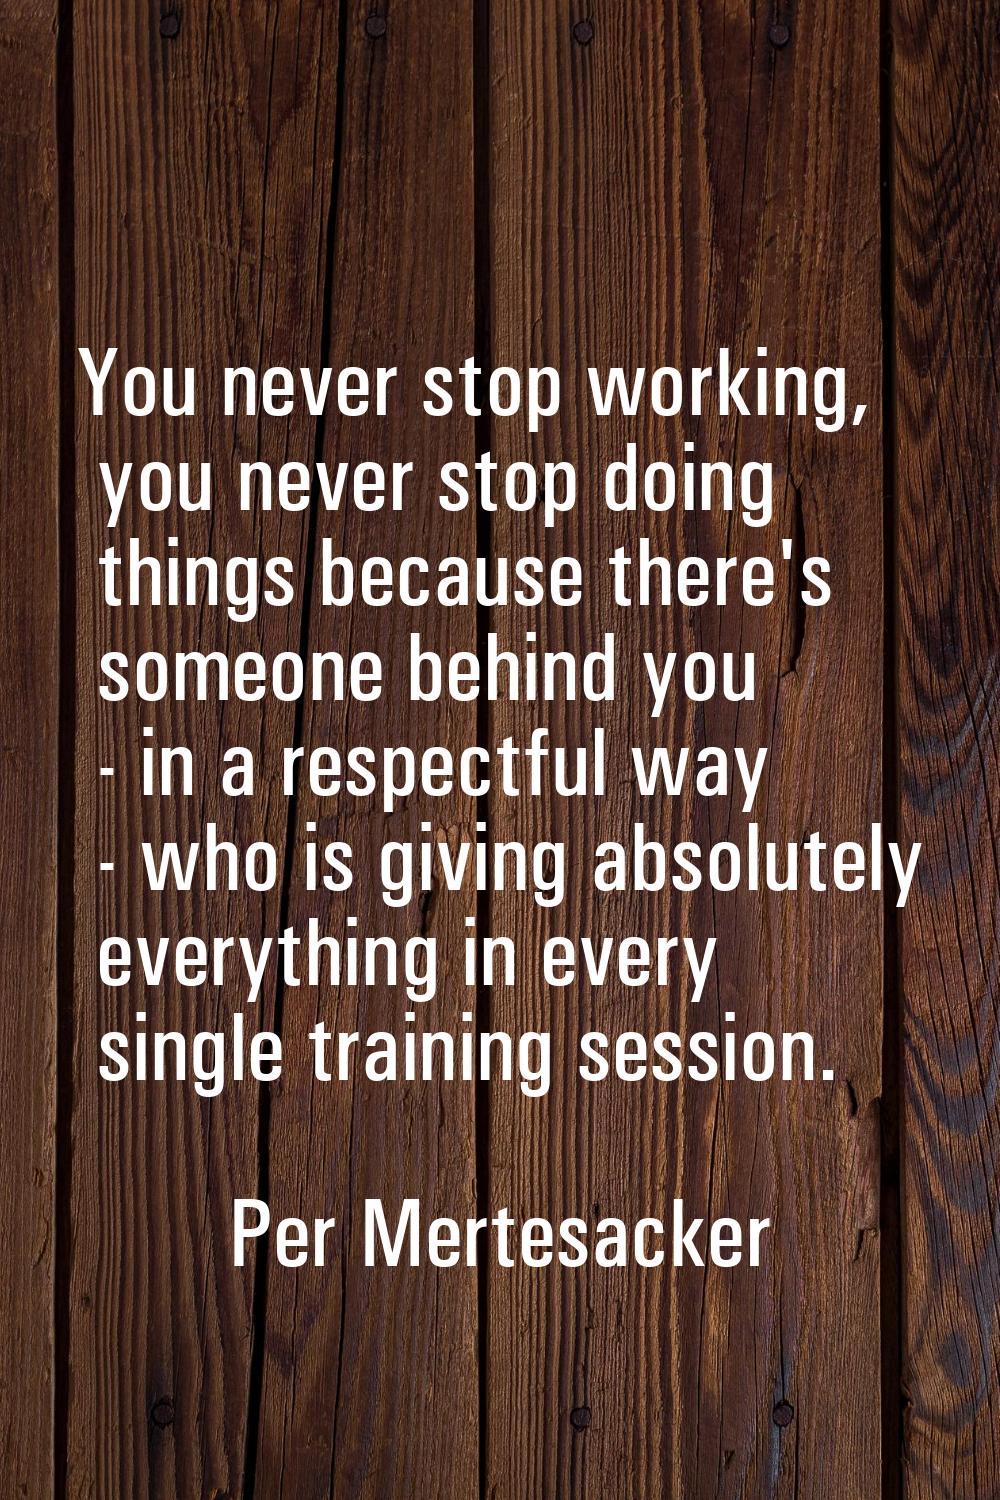 You never stop working, you never stop doing things because there's someone behind you - in a respe